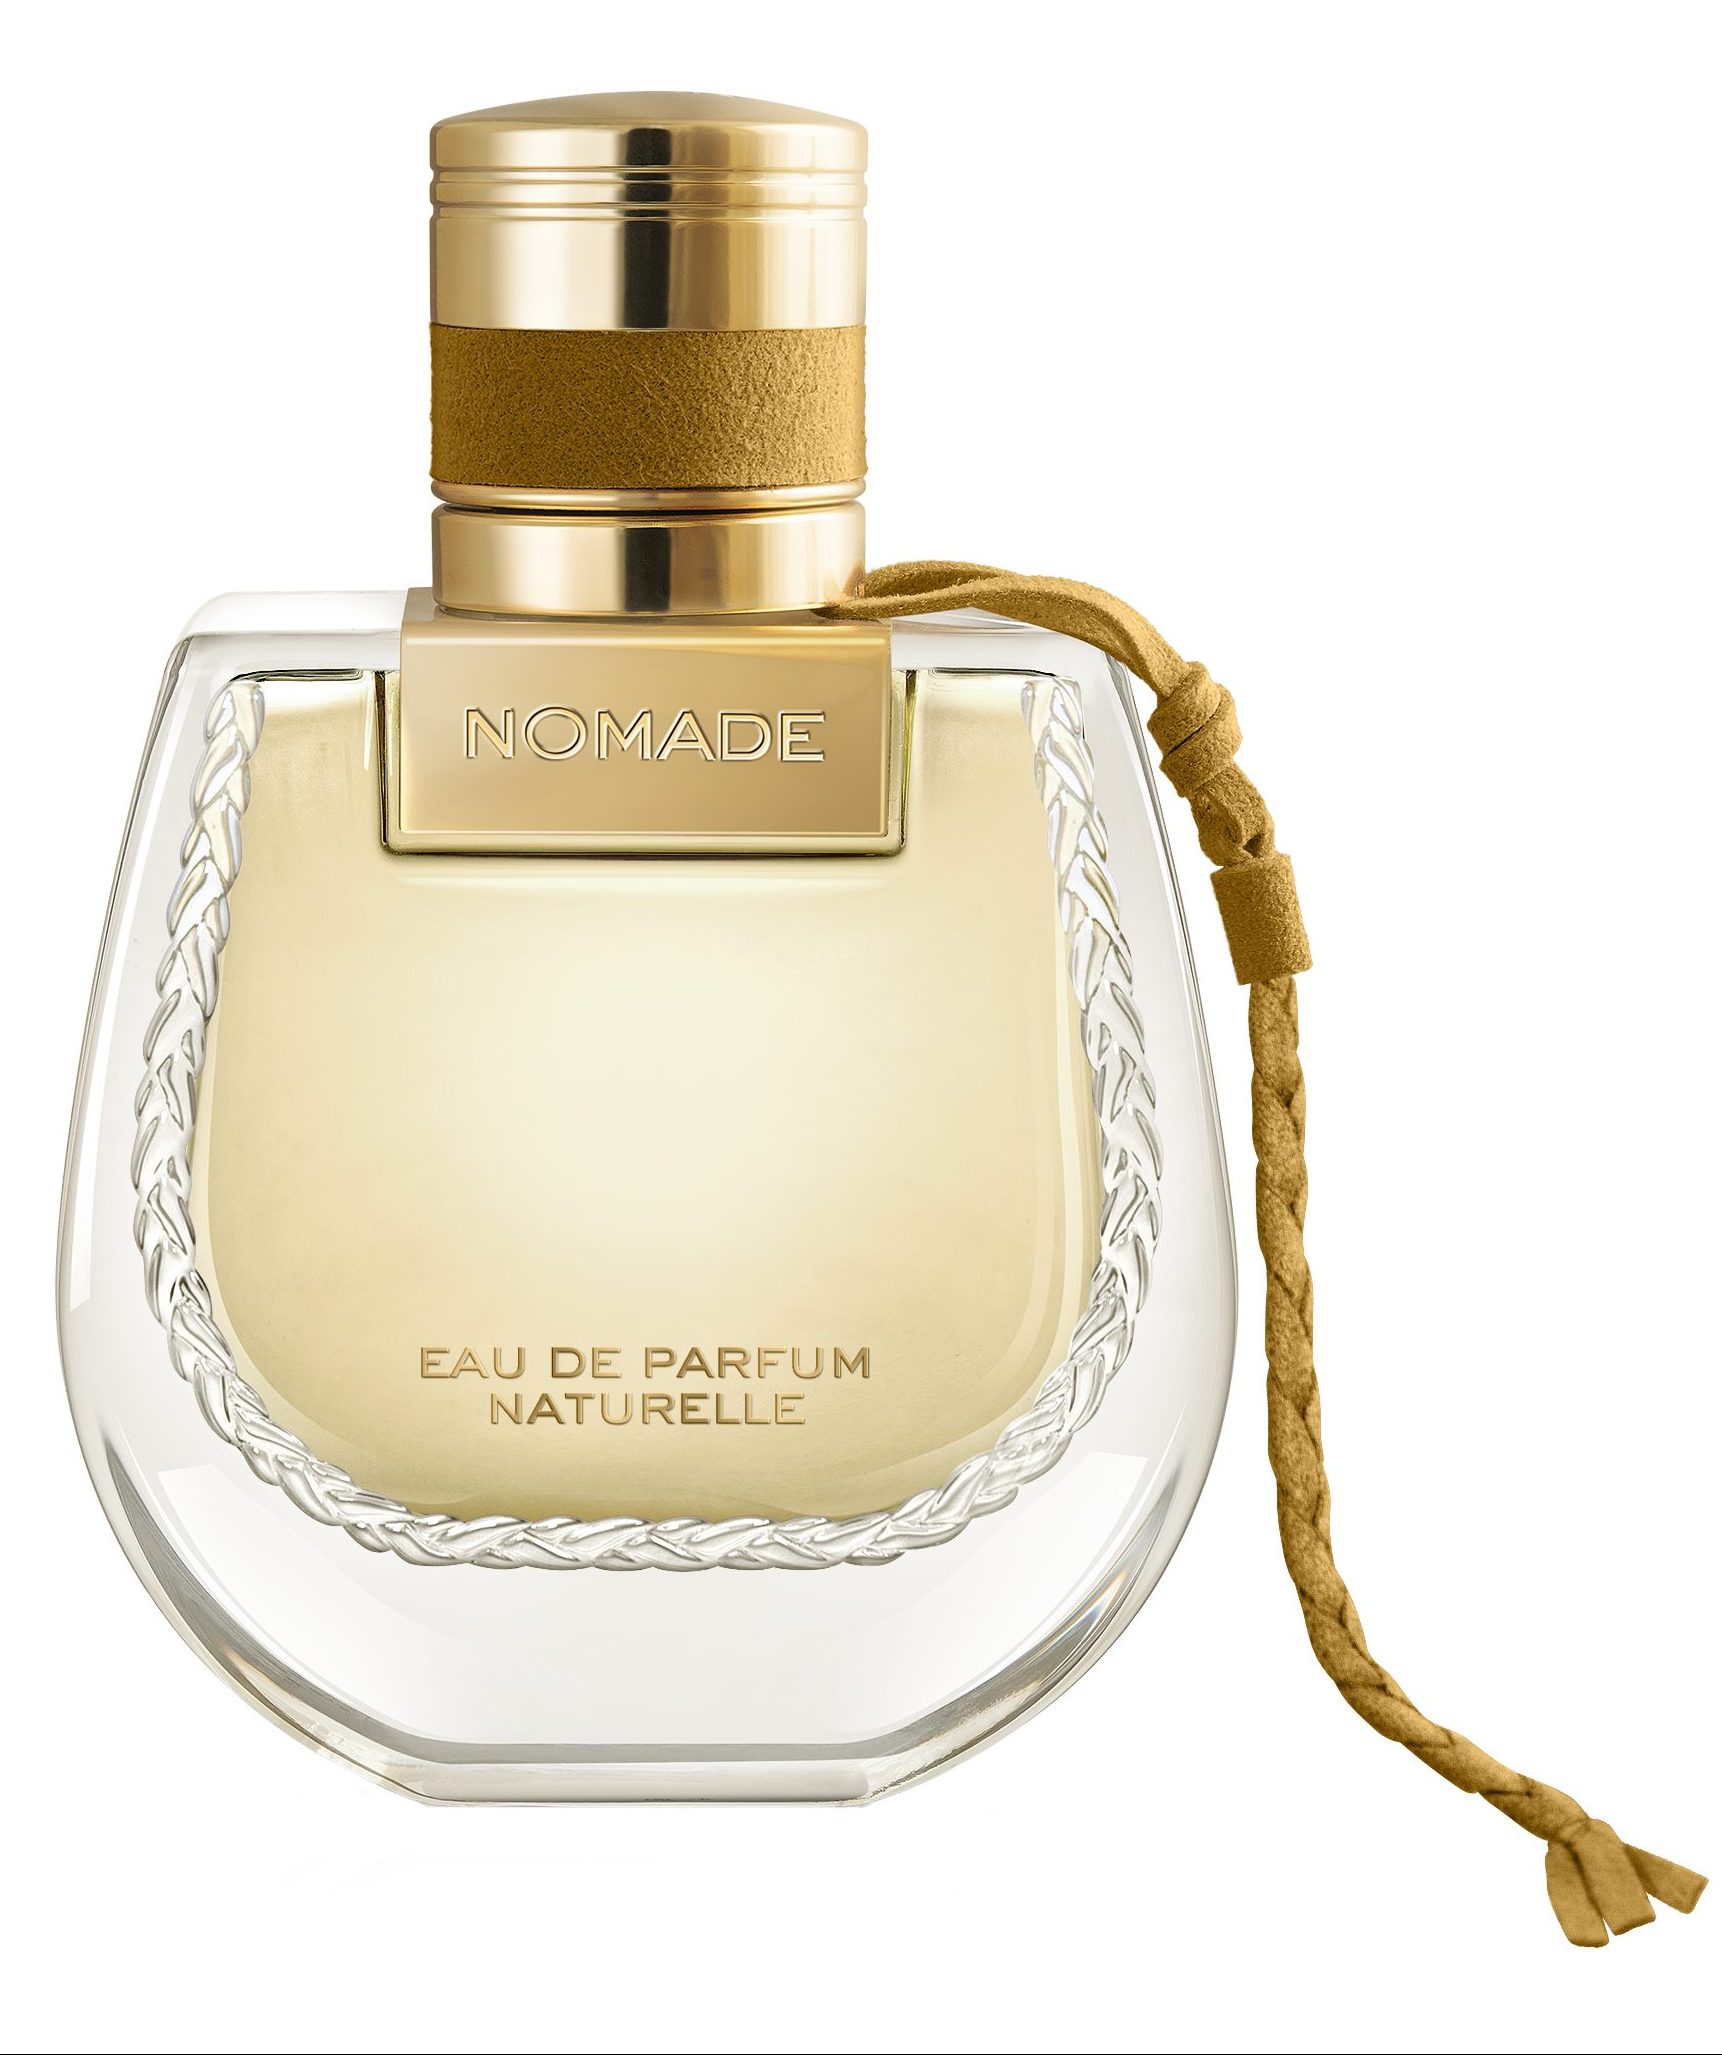 Day 27 of reviewing fragrances every day: Chloé Nomade : r